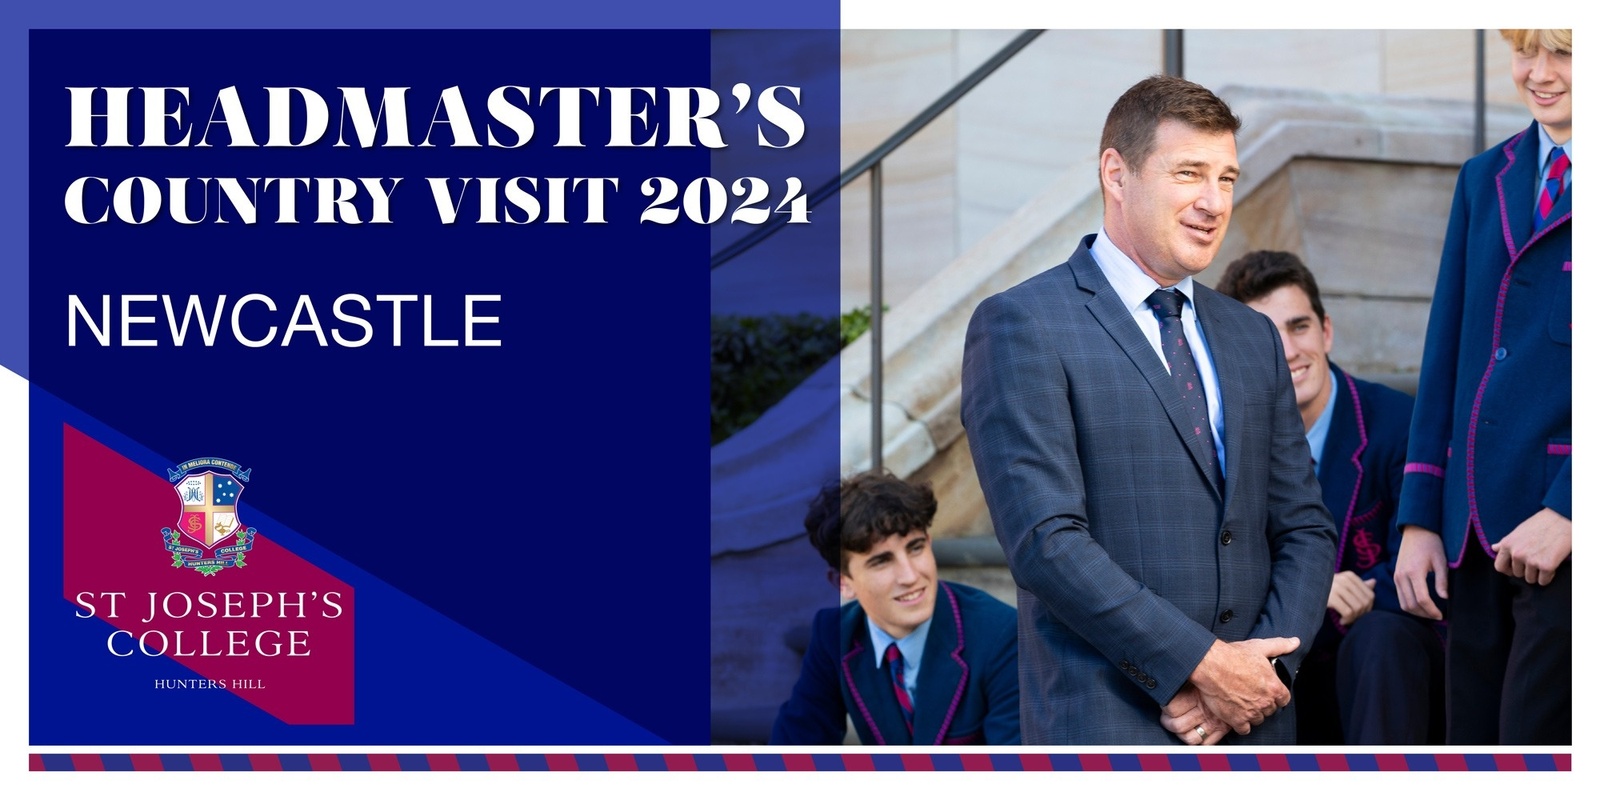 Banner image for 2024 Headmaster's Newcastle Country Visit